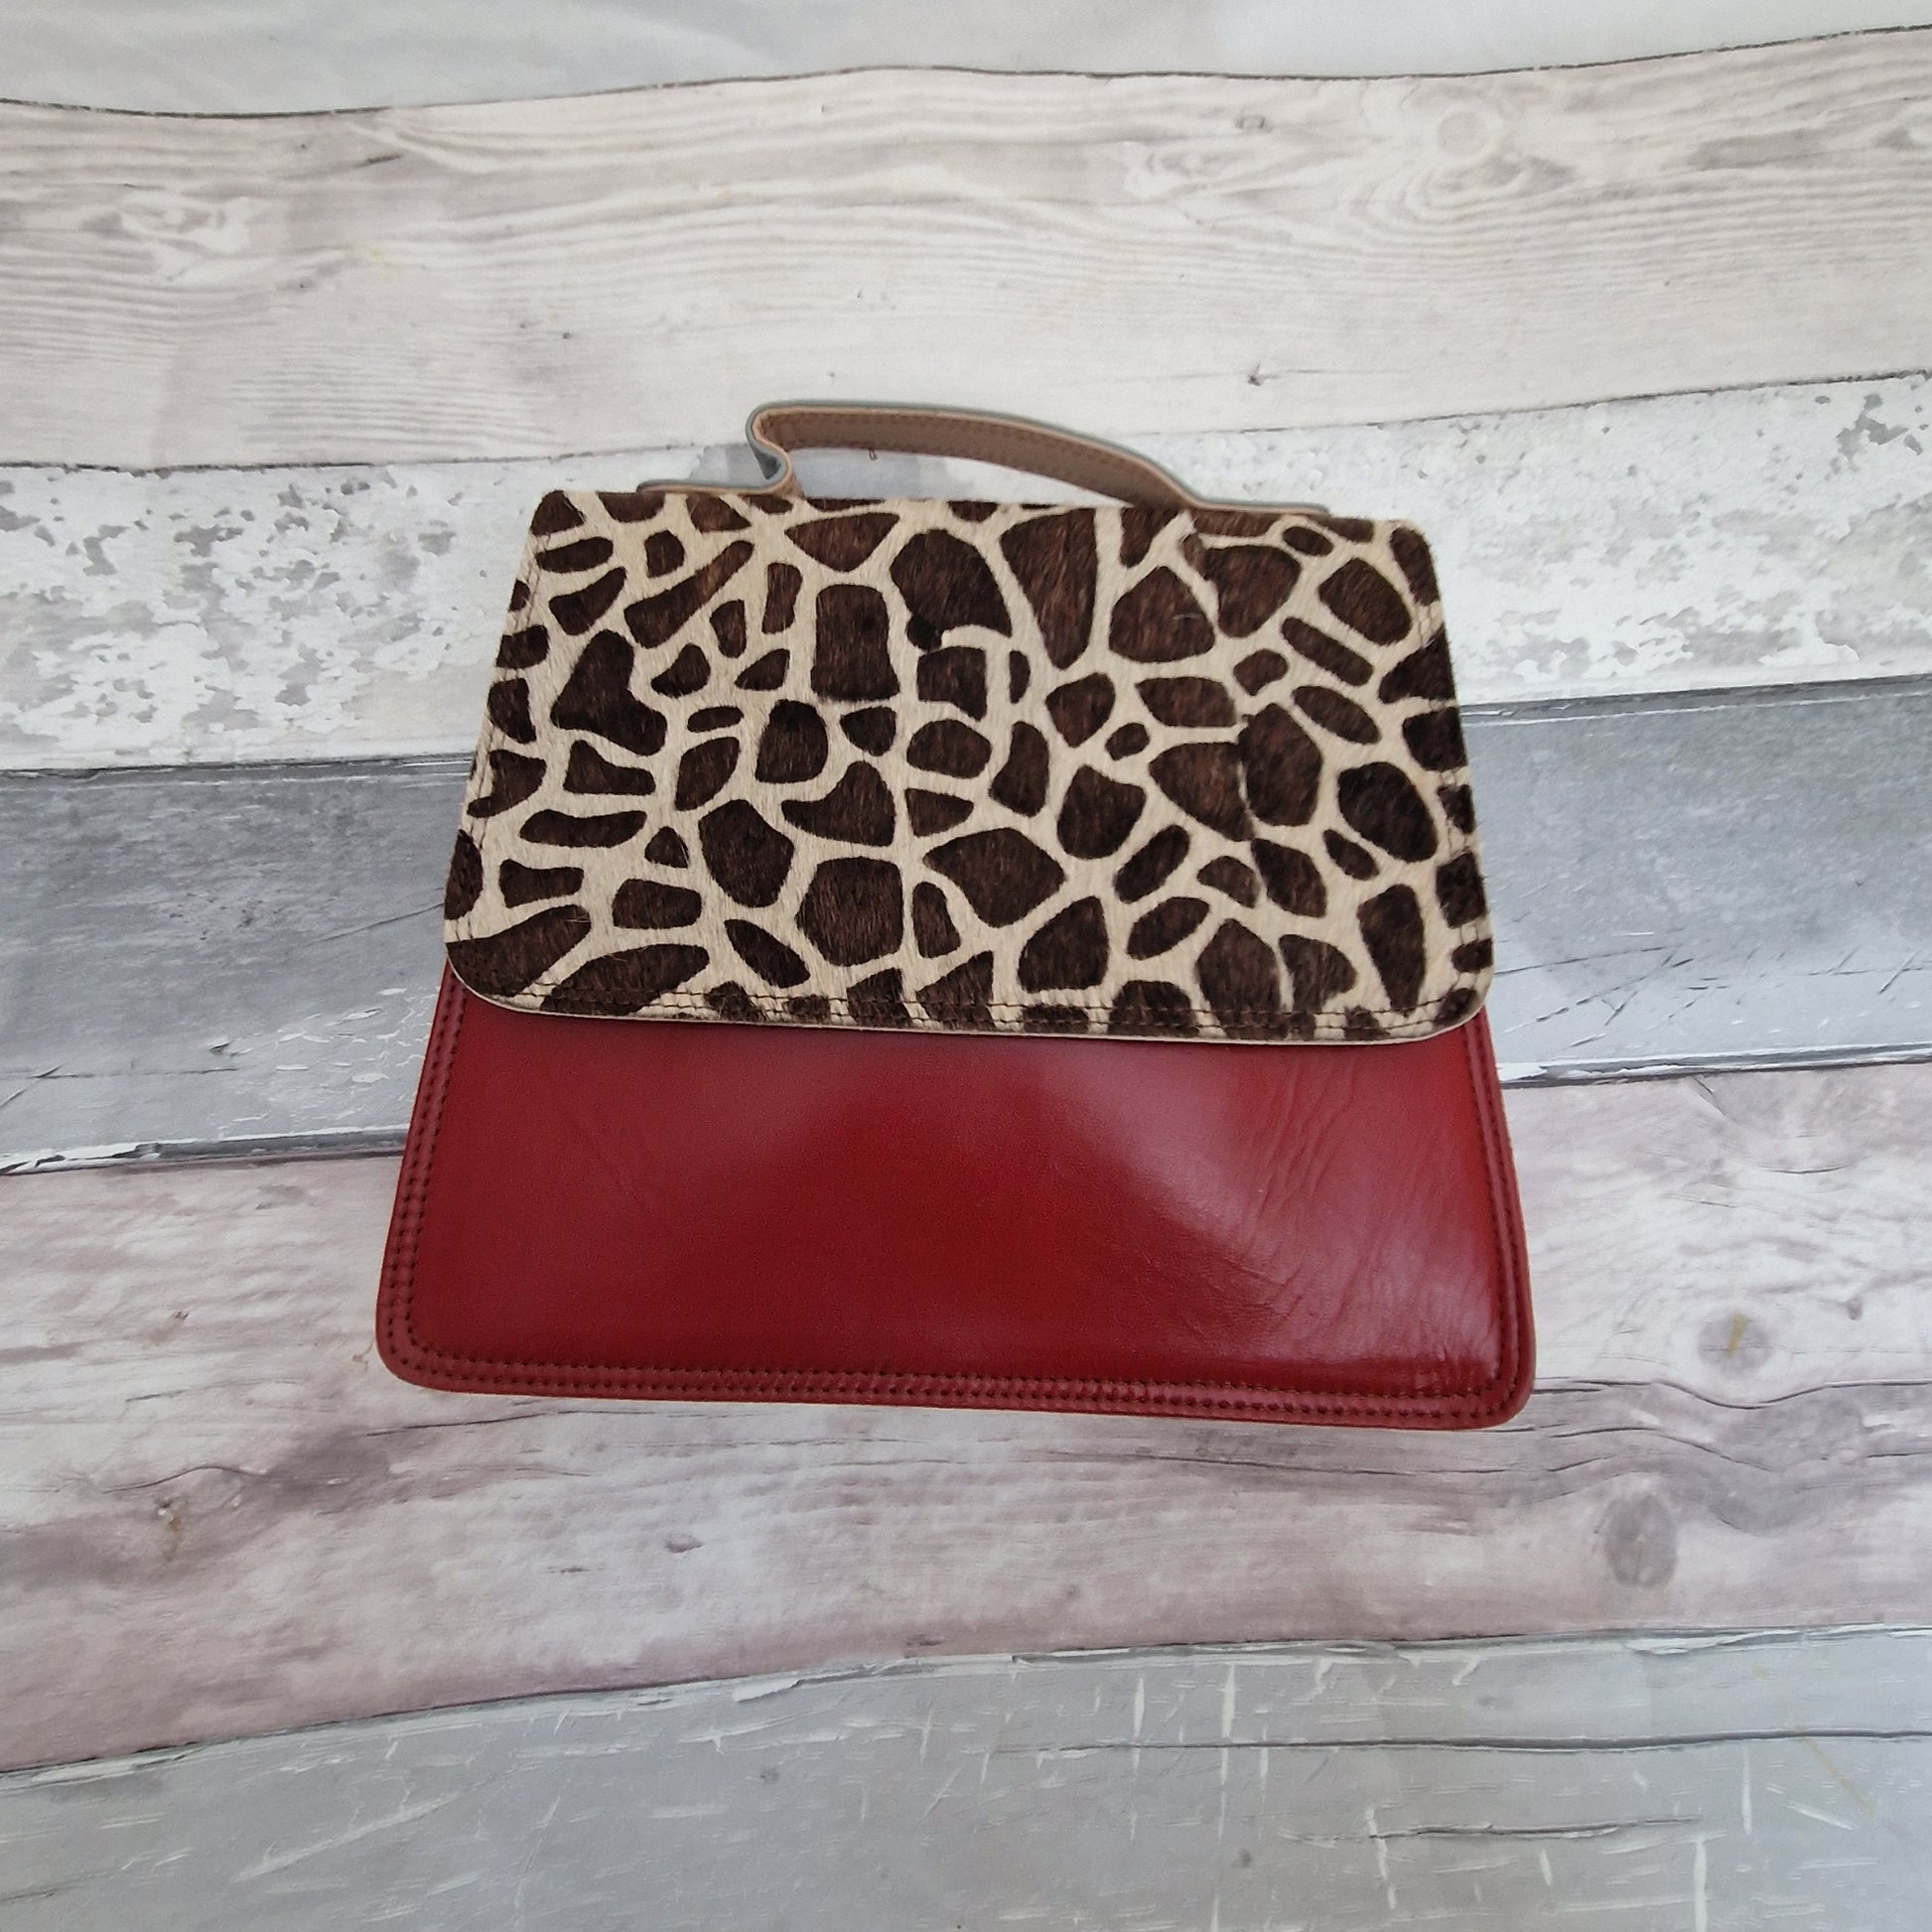 Dark Red leather bag with a textured panel in a giraffe print.